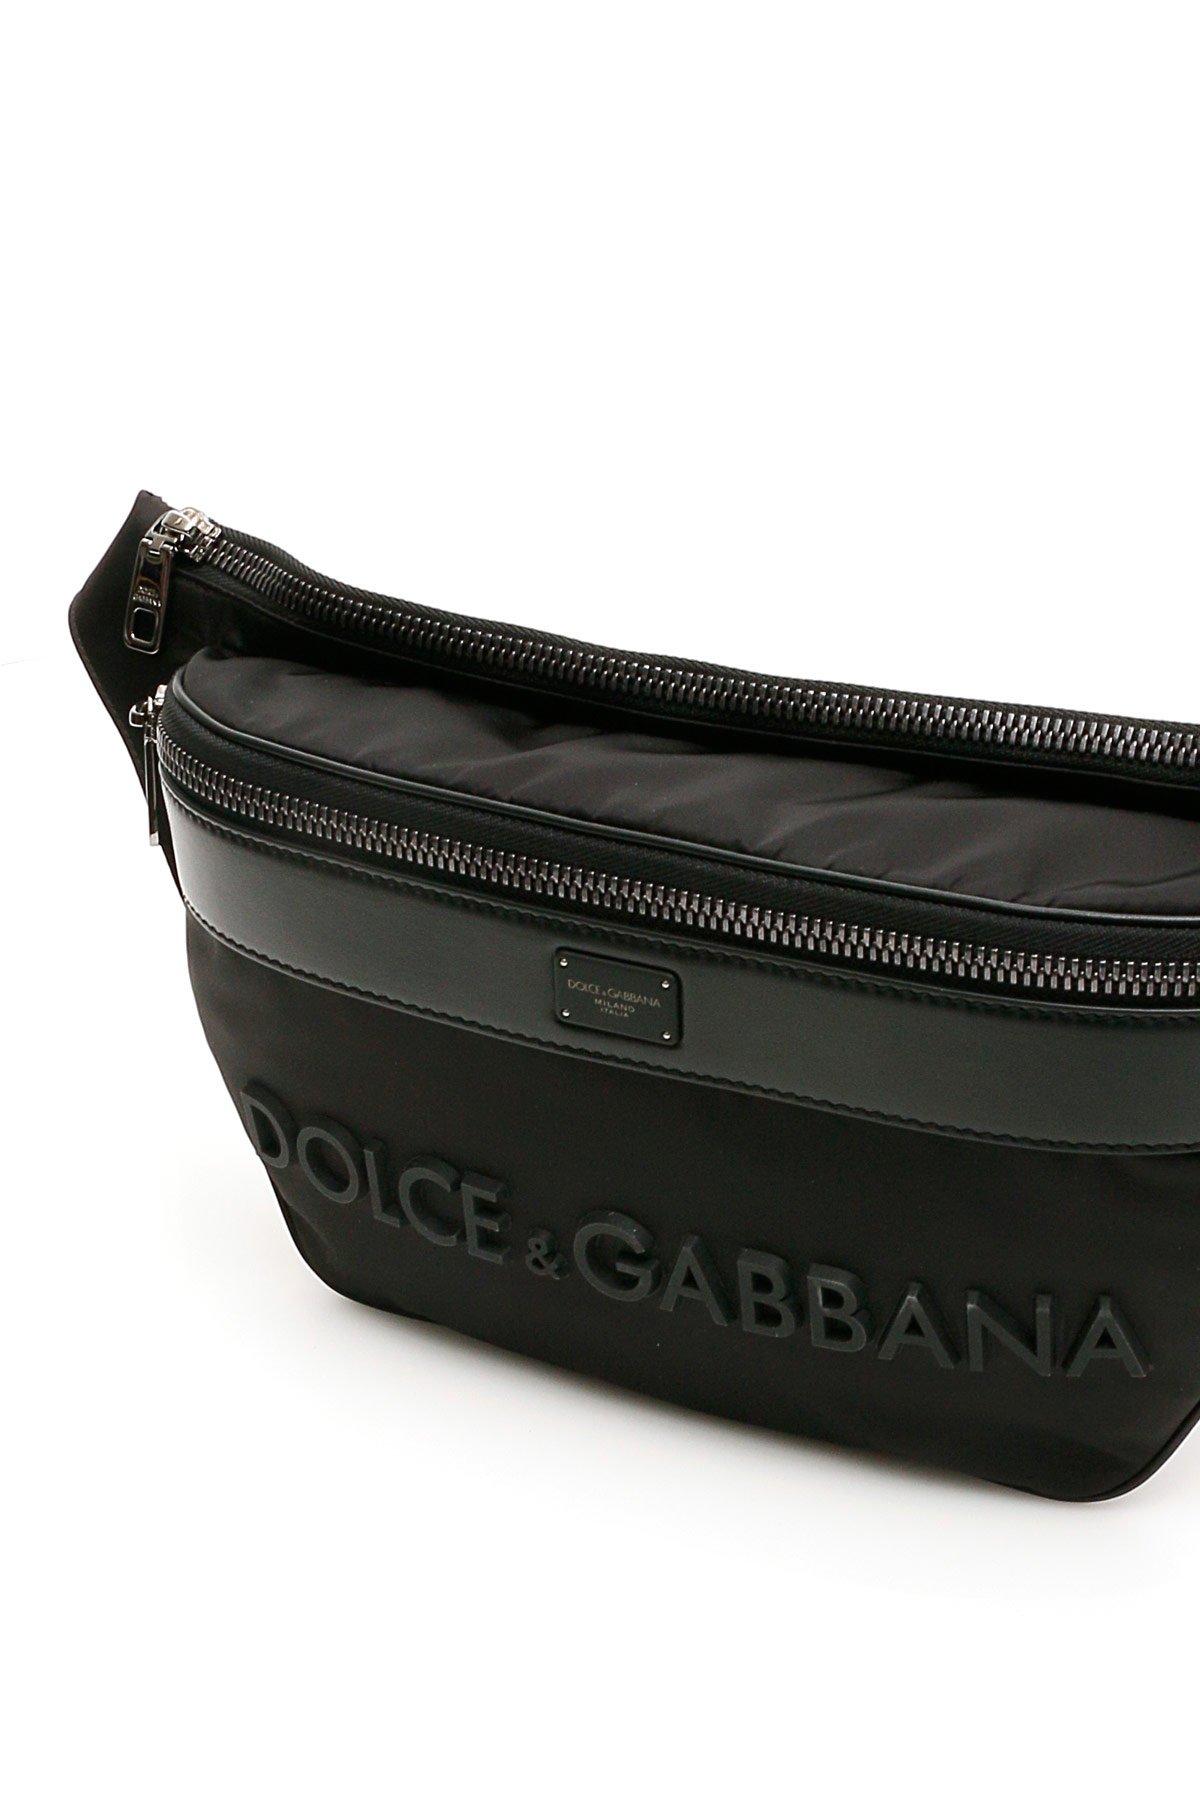 Dolce & Gabbana Synthetic Logo Fanny Pack in Black for Men - Save 28% ...